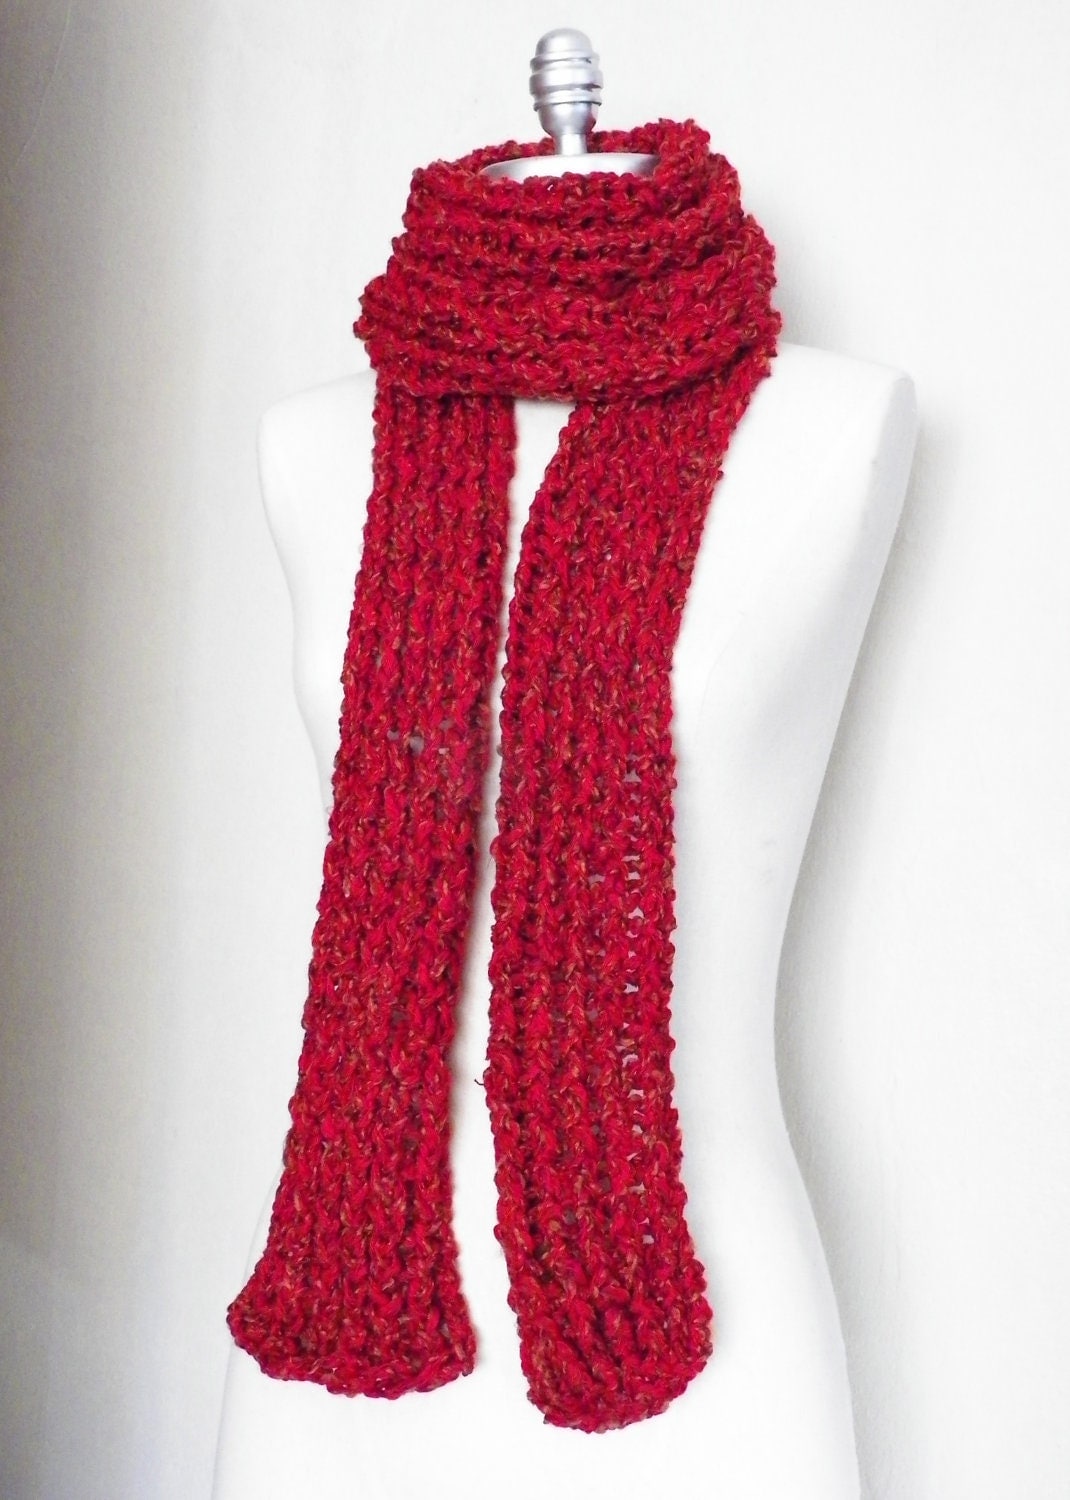 Big Red Scarf Knitwear Chunky Knit Extra Long Loose Knit